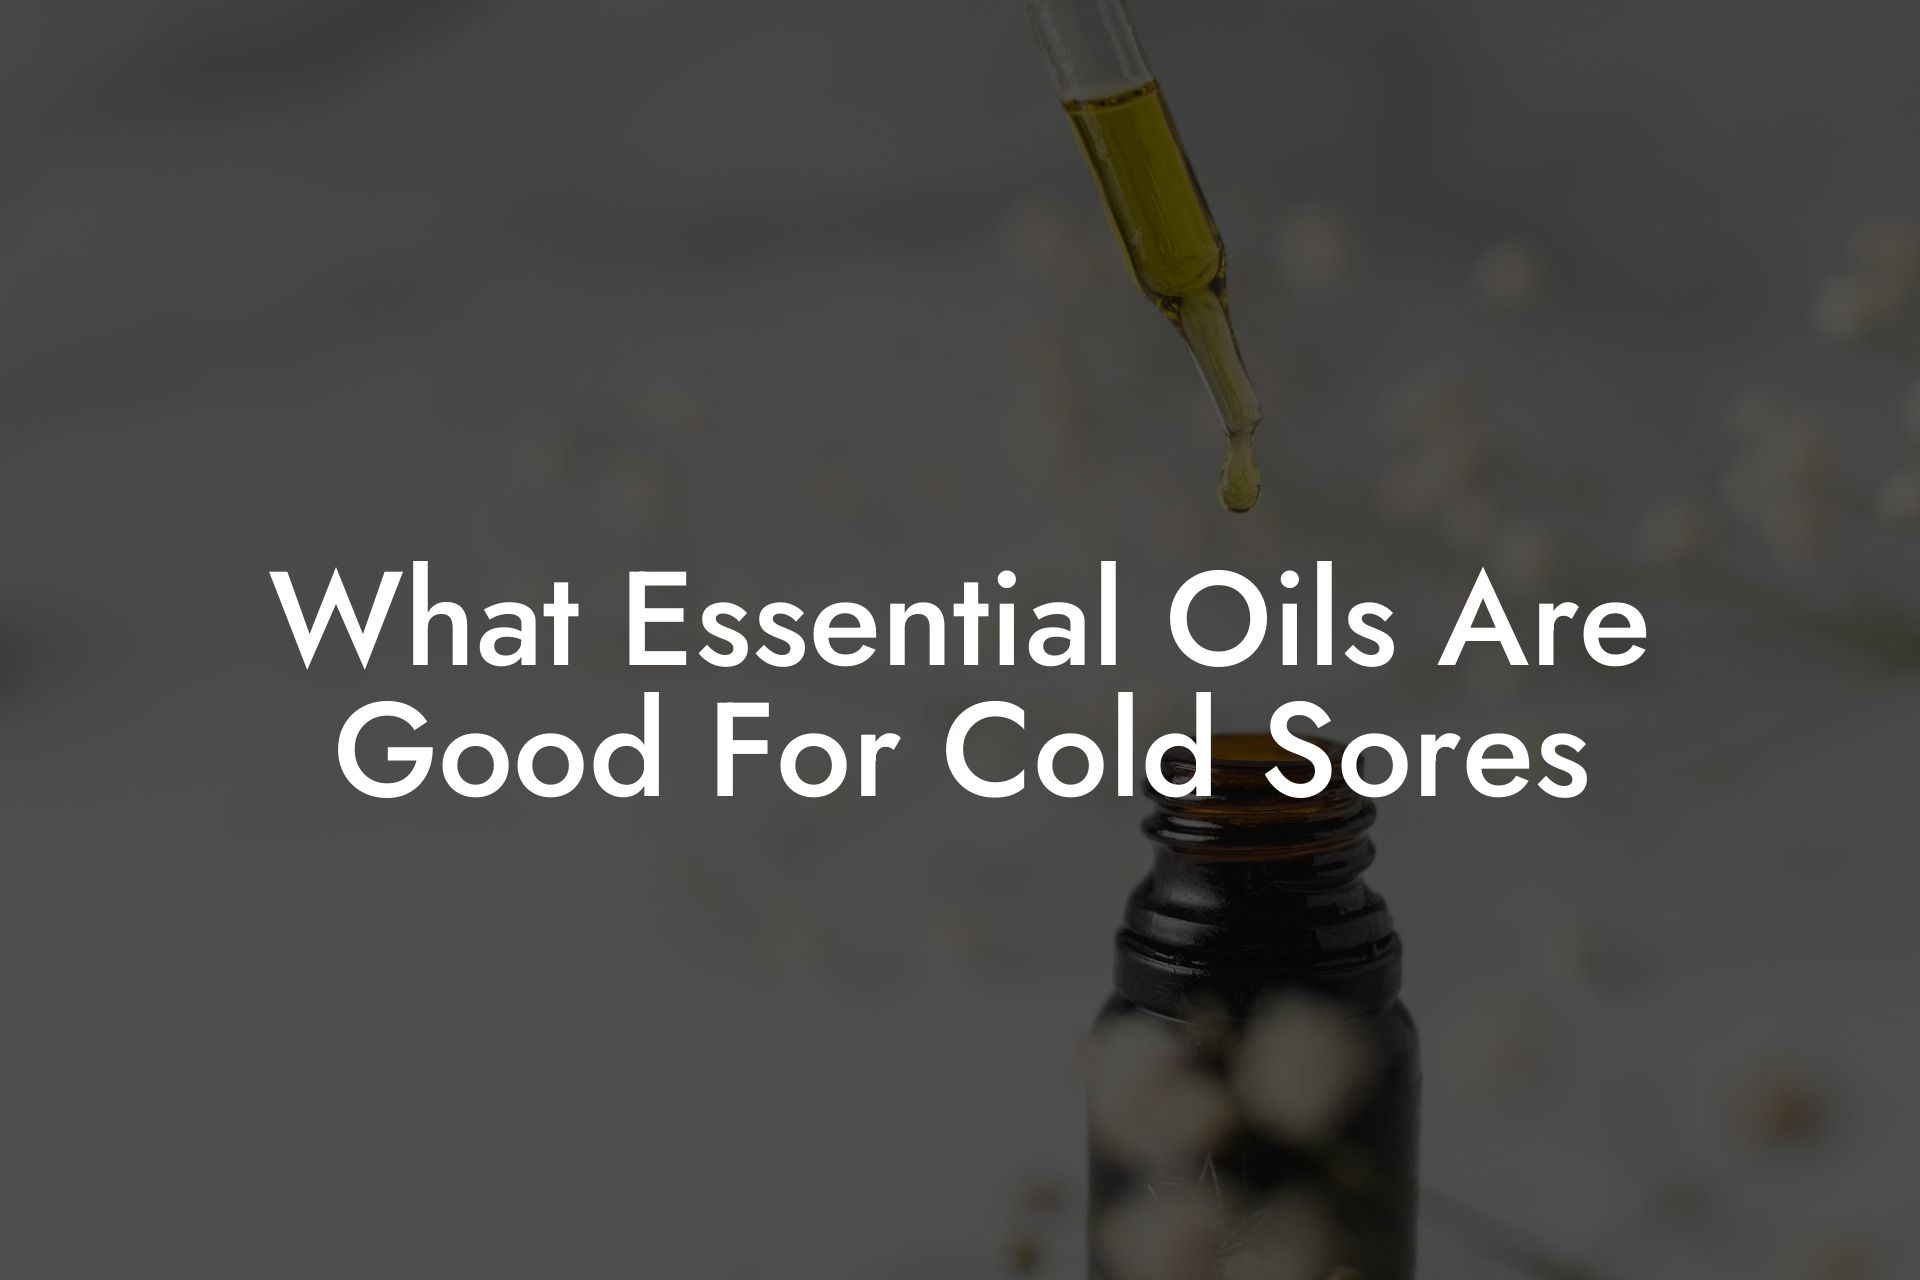 What Essential Oils Are Good For Cold Sores